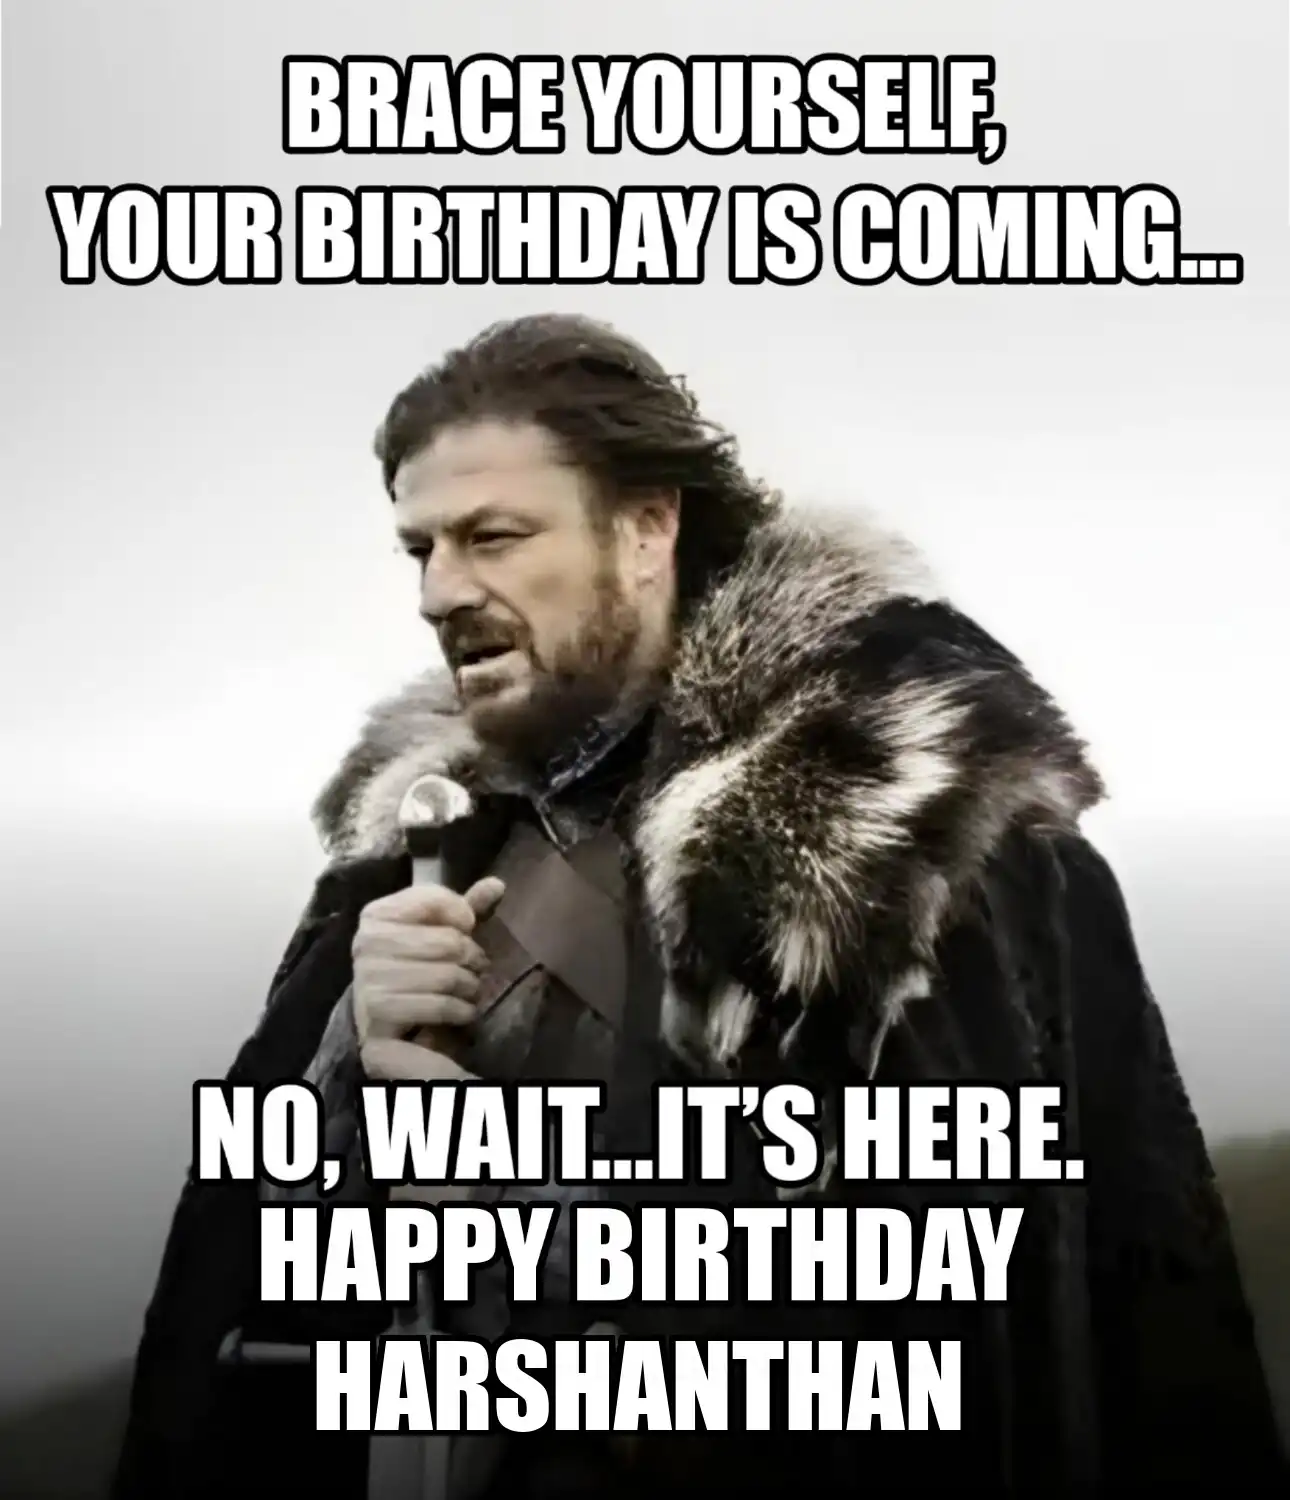 Happy Birthday Harshanthan Brace Yourself Your Birthday Is Coming Meme